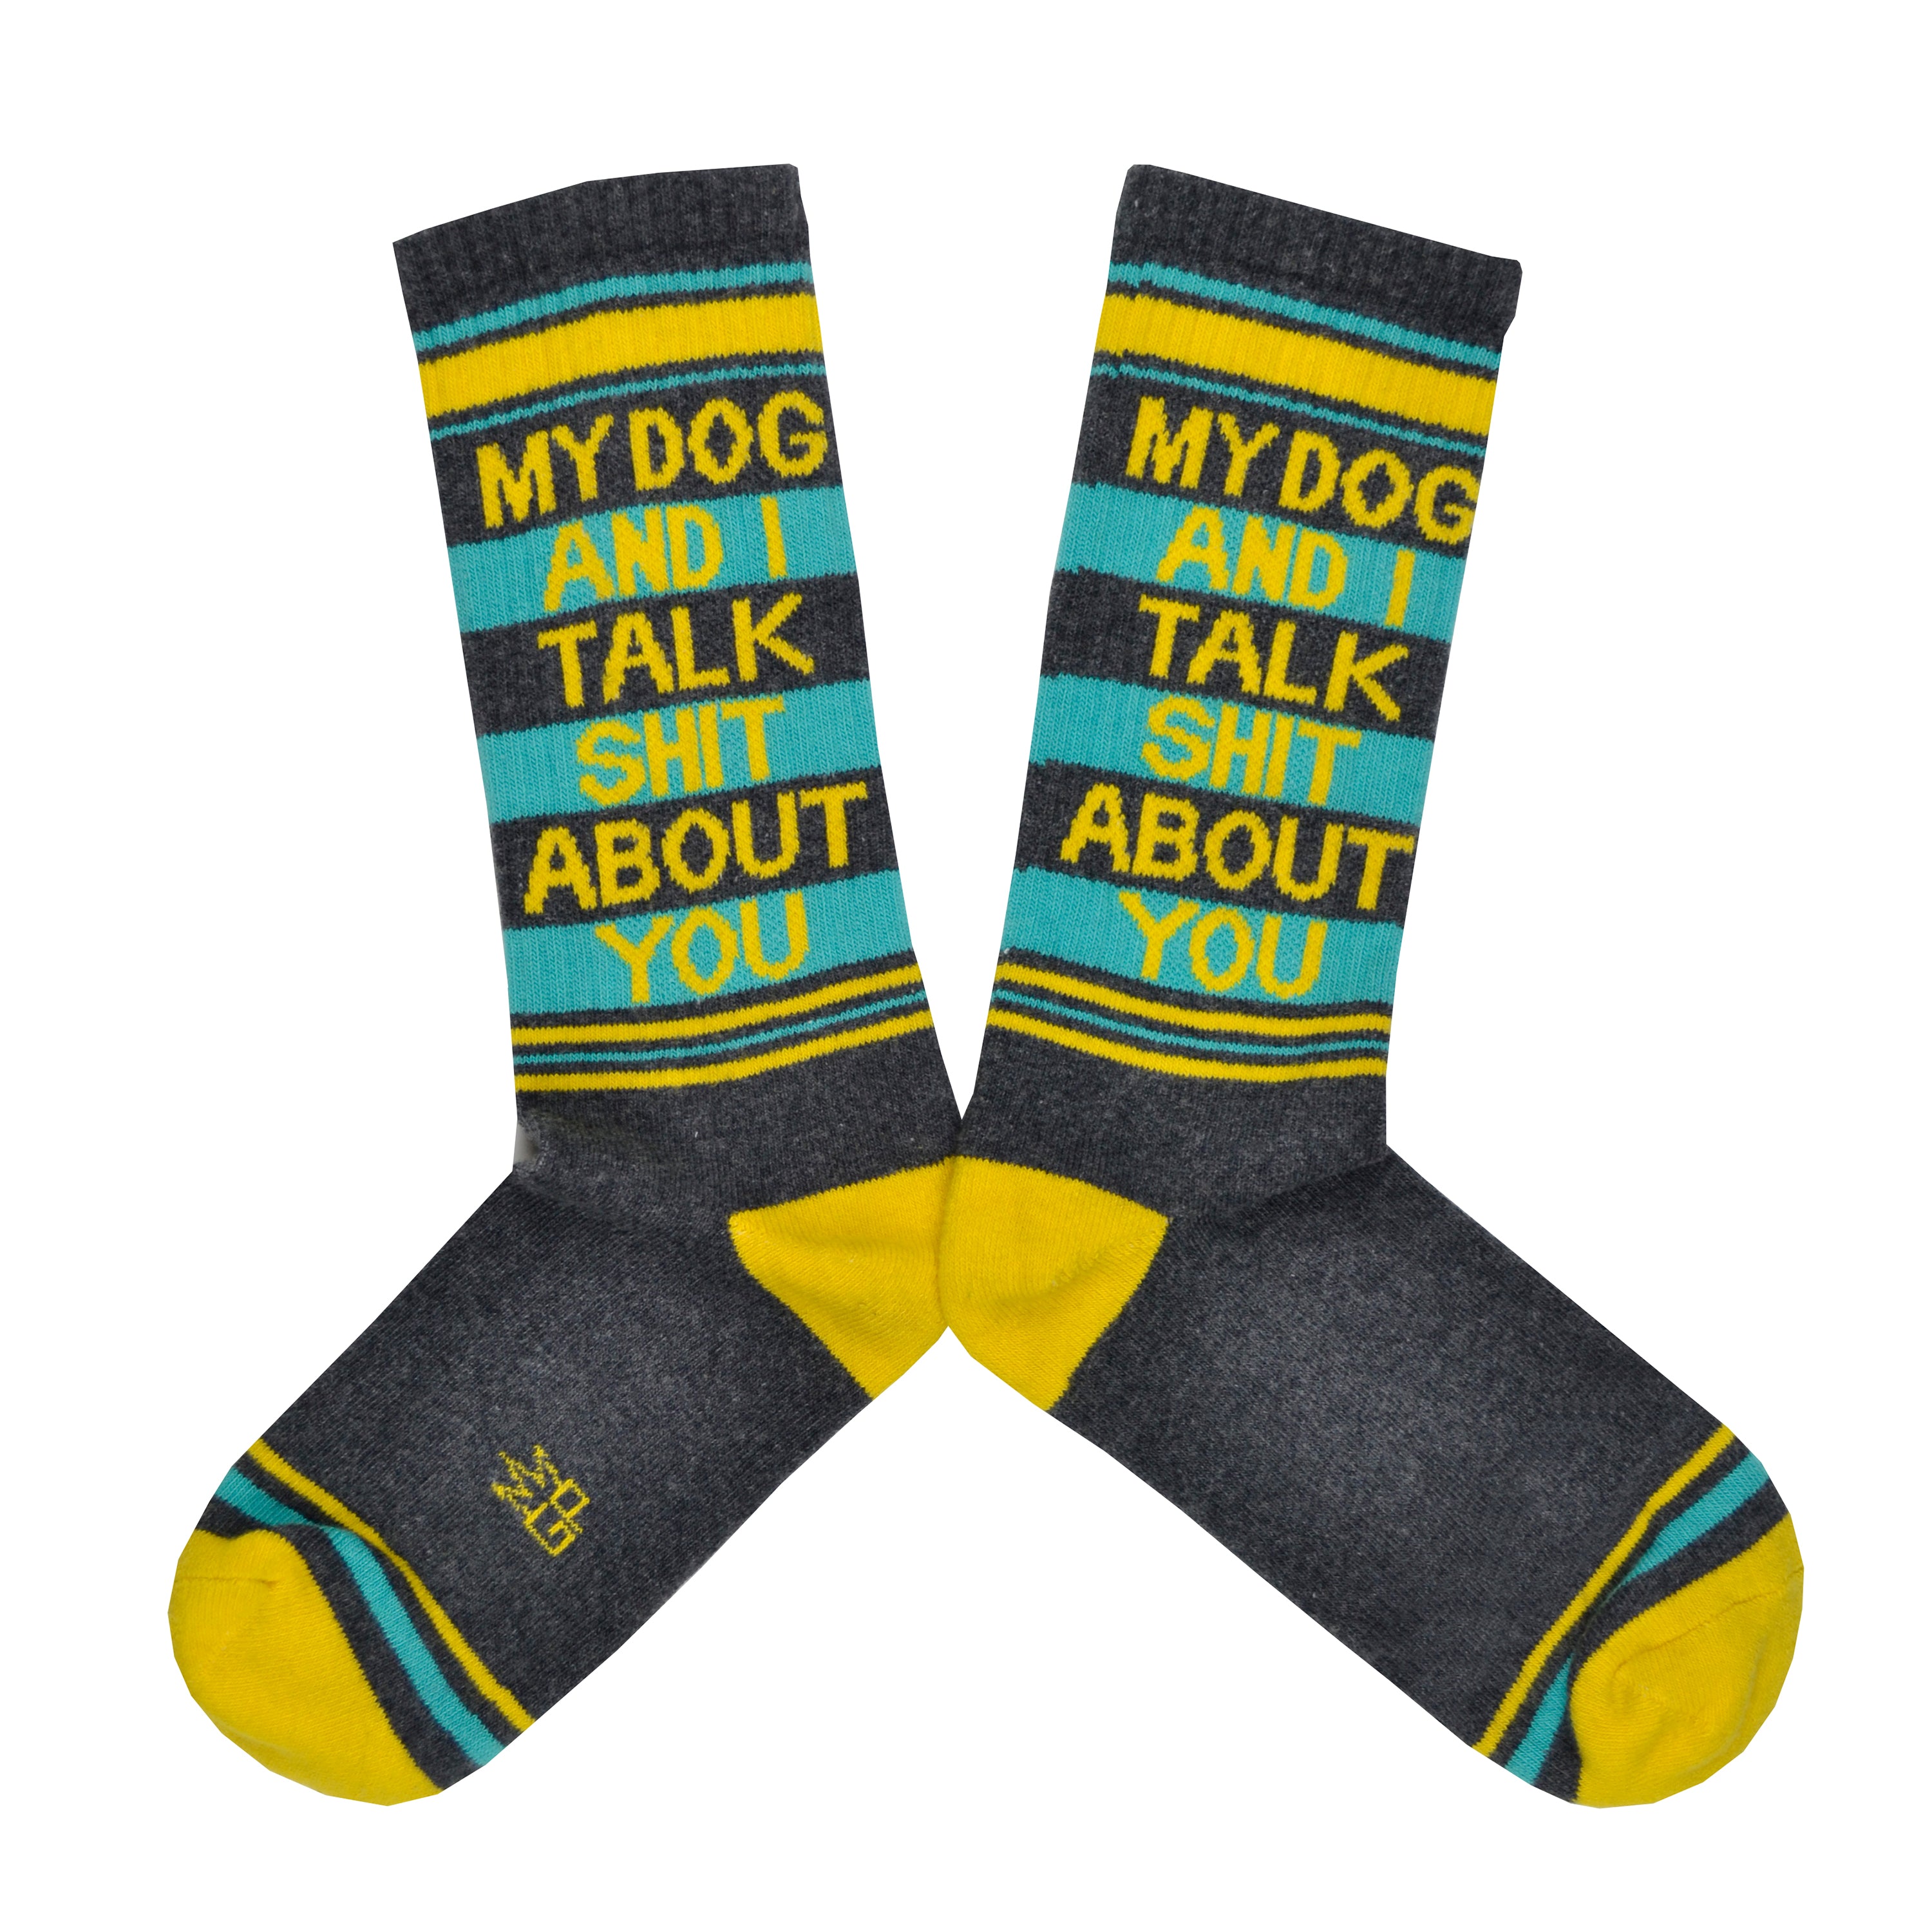 These gray cotton unisex crew socks with a yellow toe and yellow and blue striped cuff by the brand Gumball Poodle feature the words 